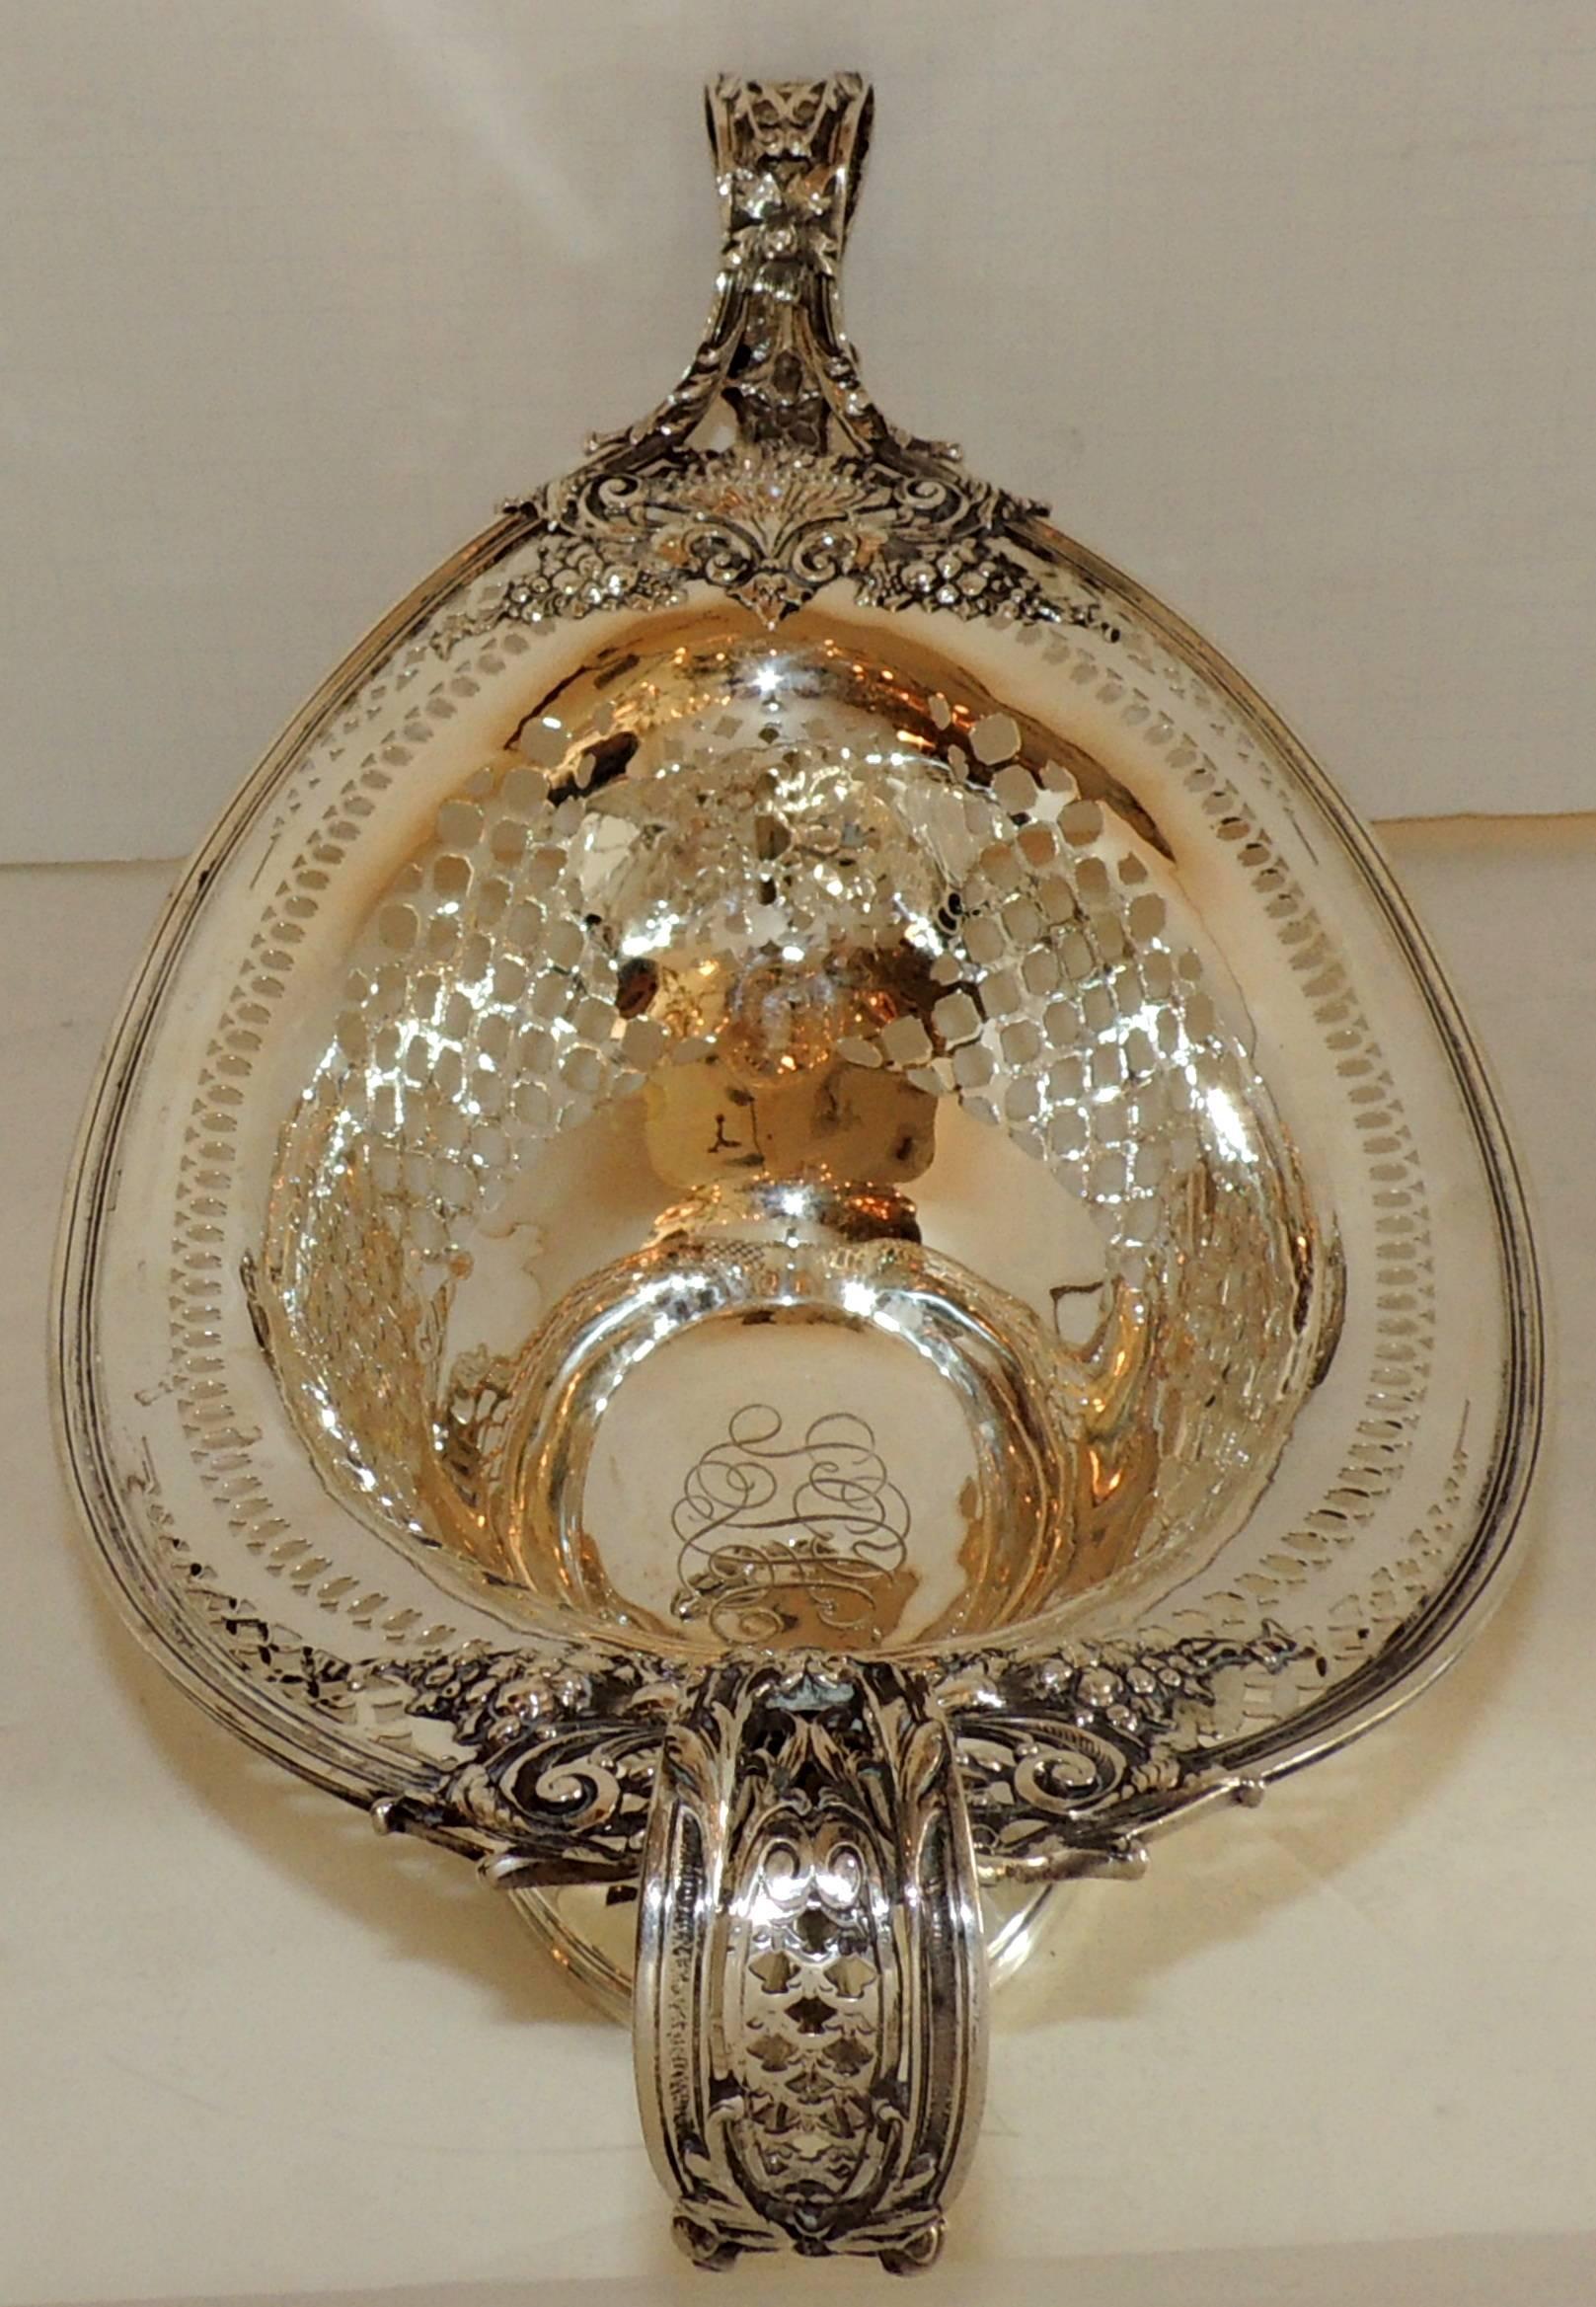 Mid-20th Century Caldwell Sterling Silver Two-Piece Centerpiece Pierced Handle Bowl & under Tray